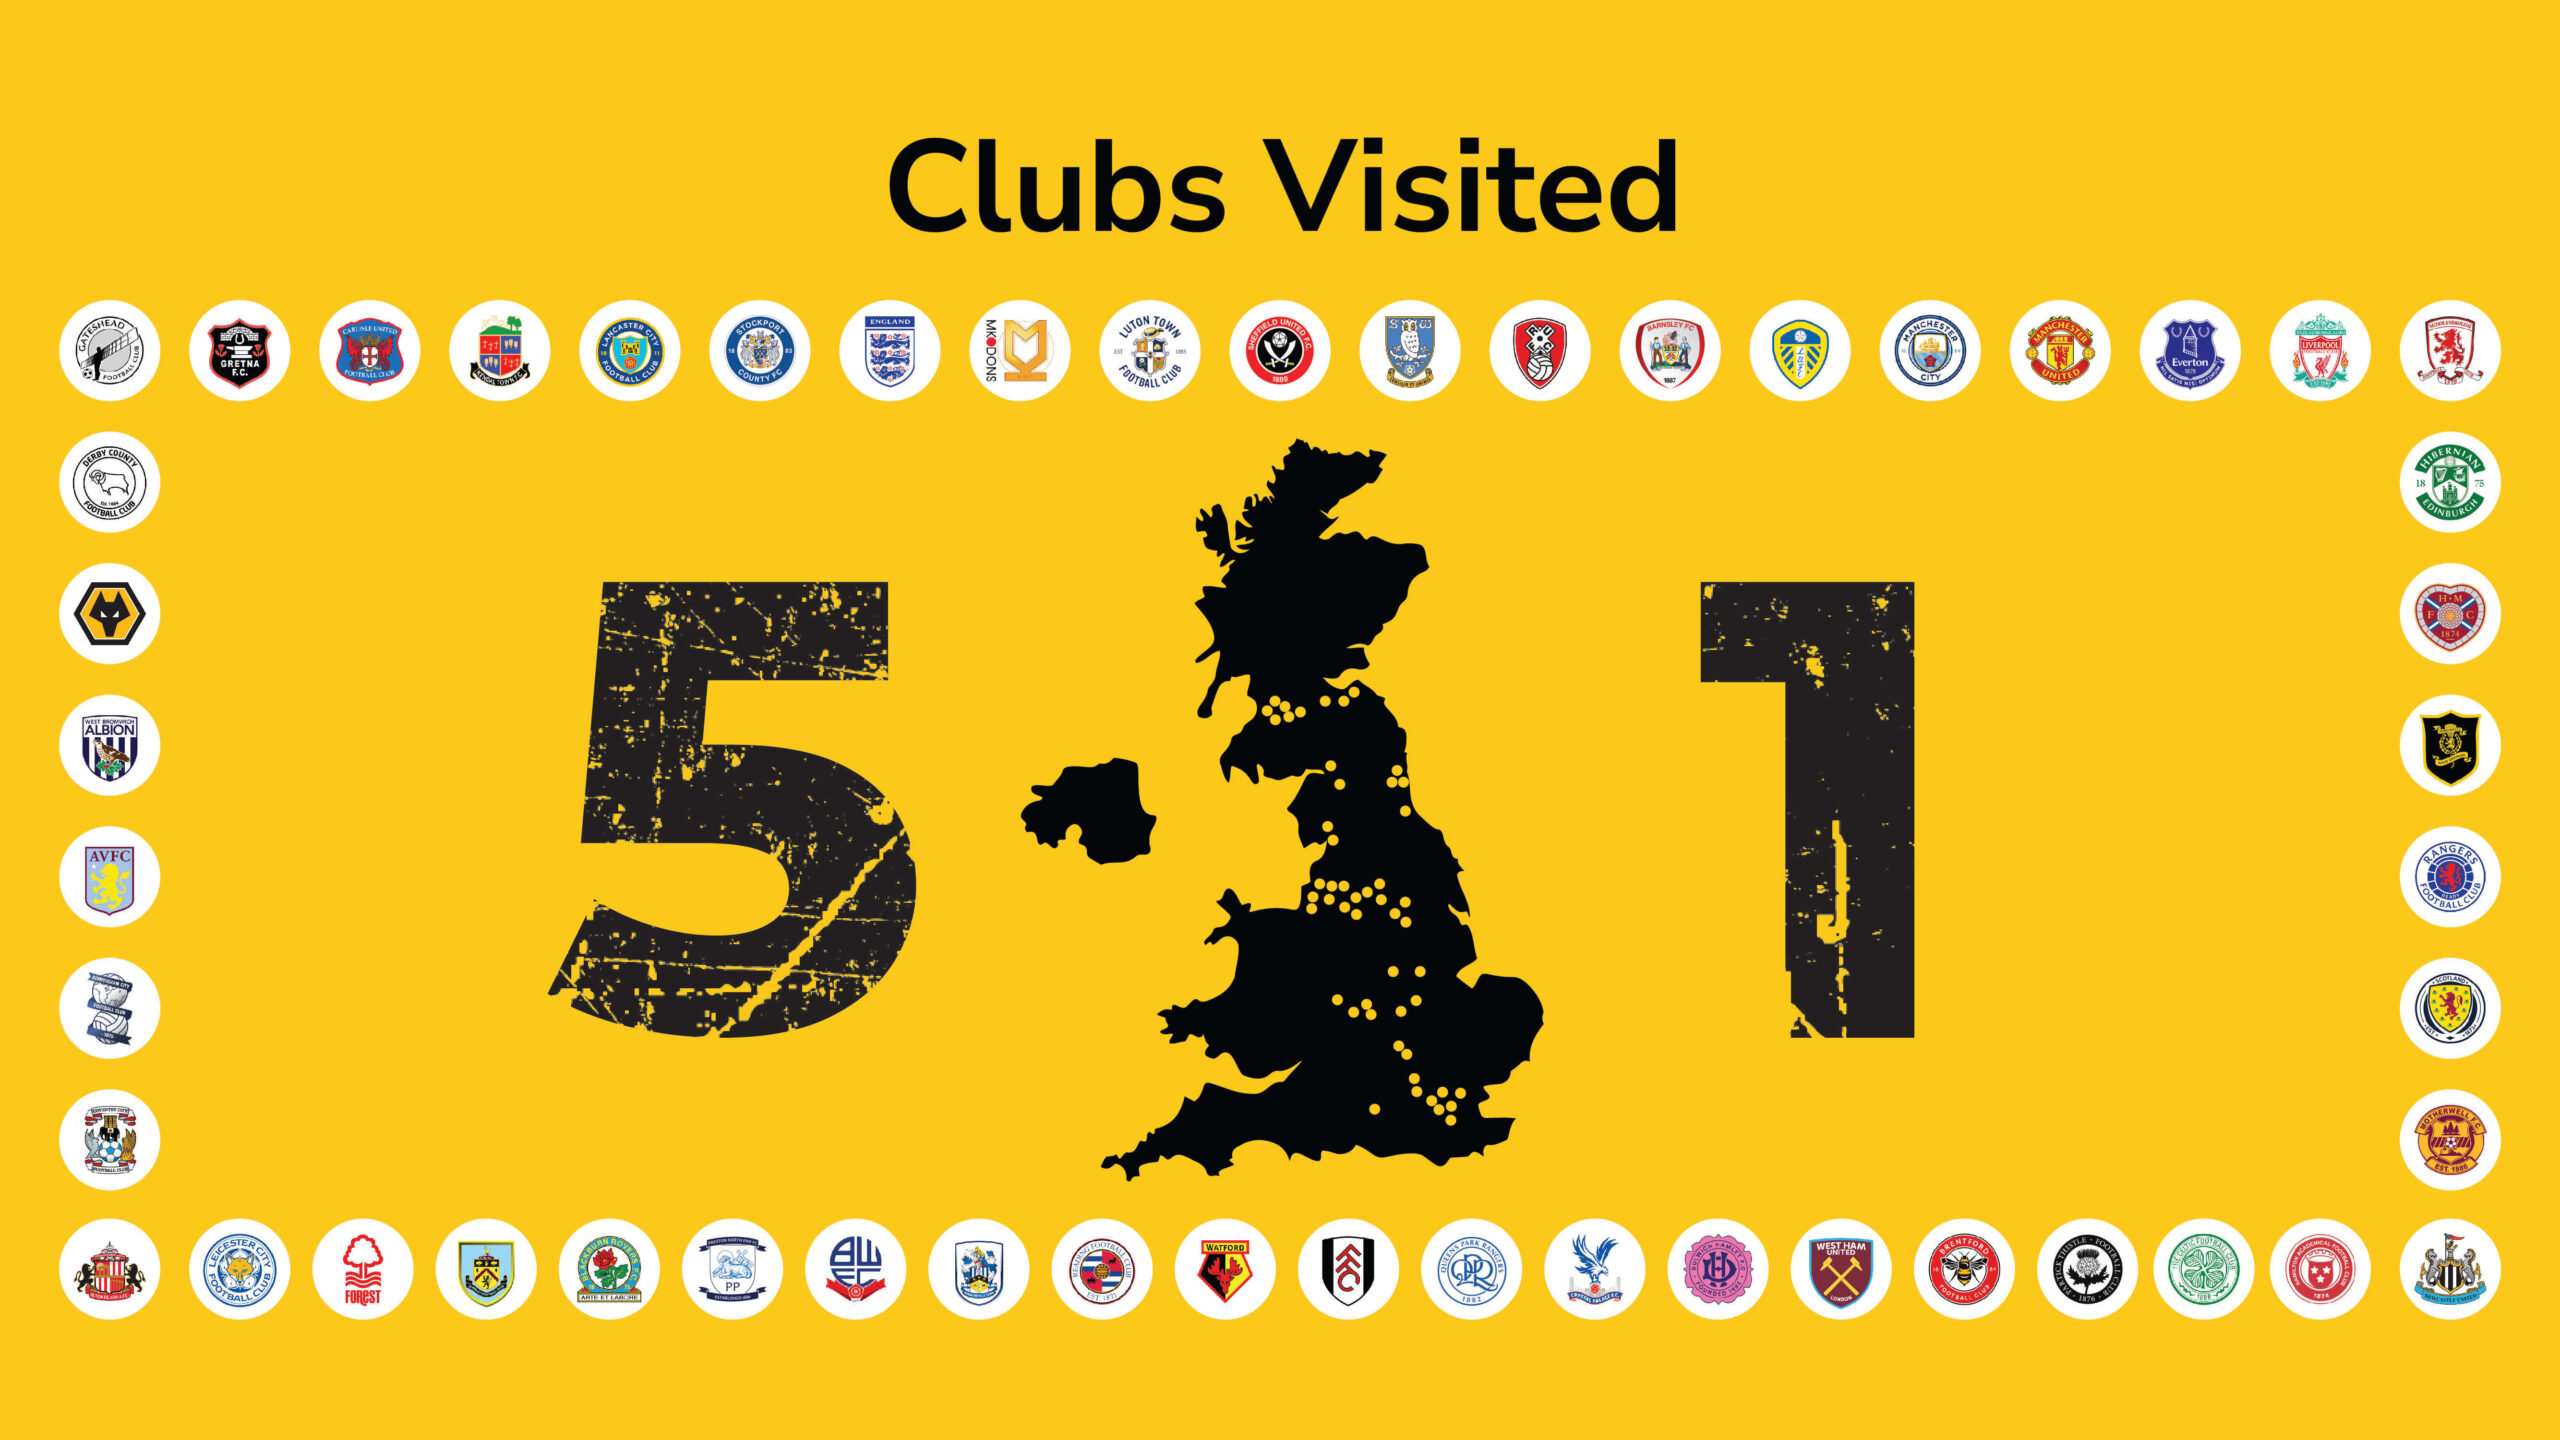 51 clubs visited (1)